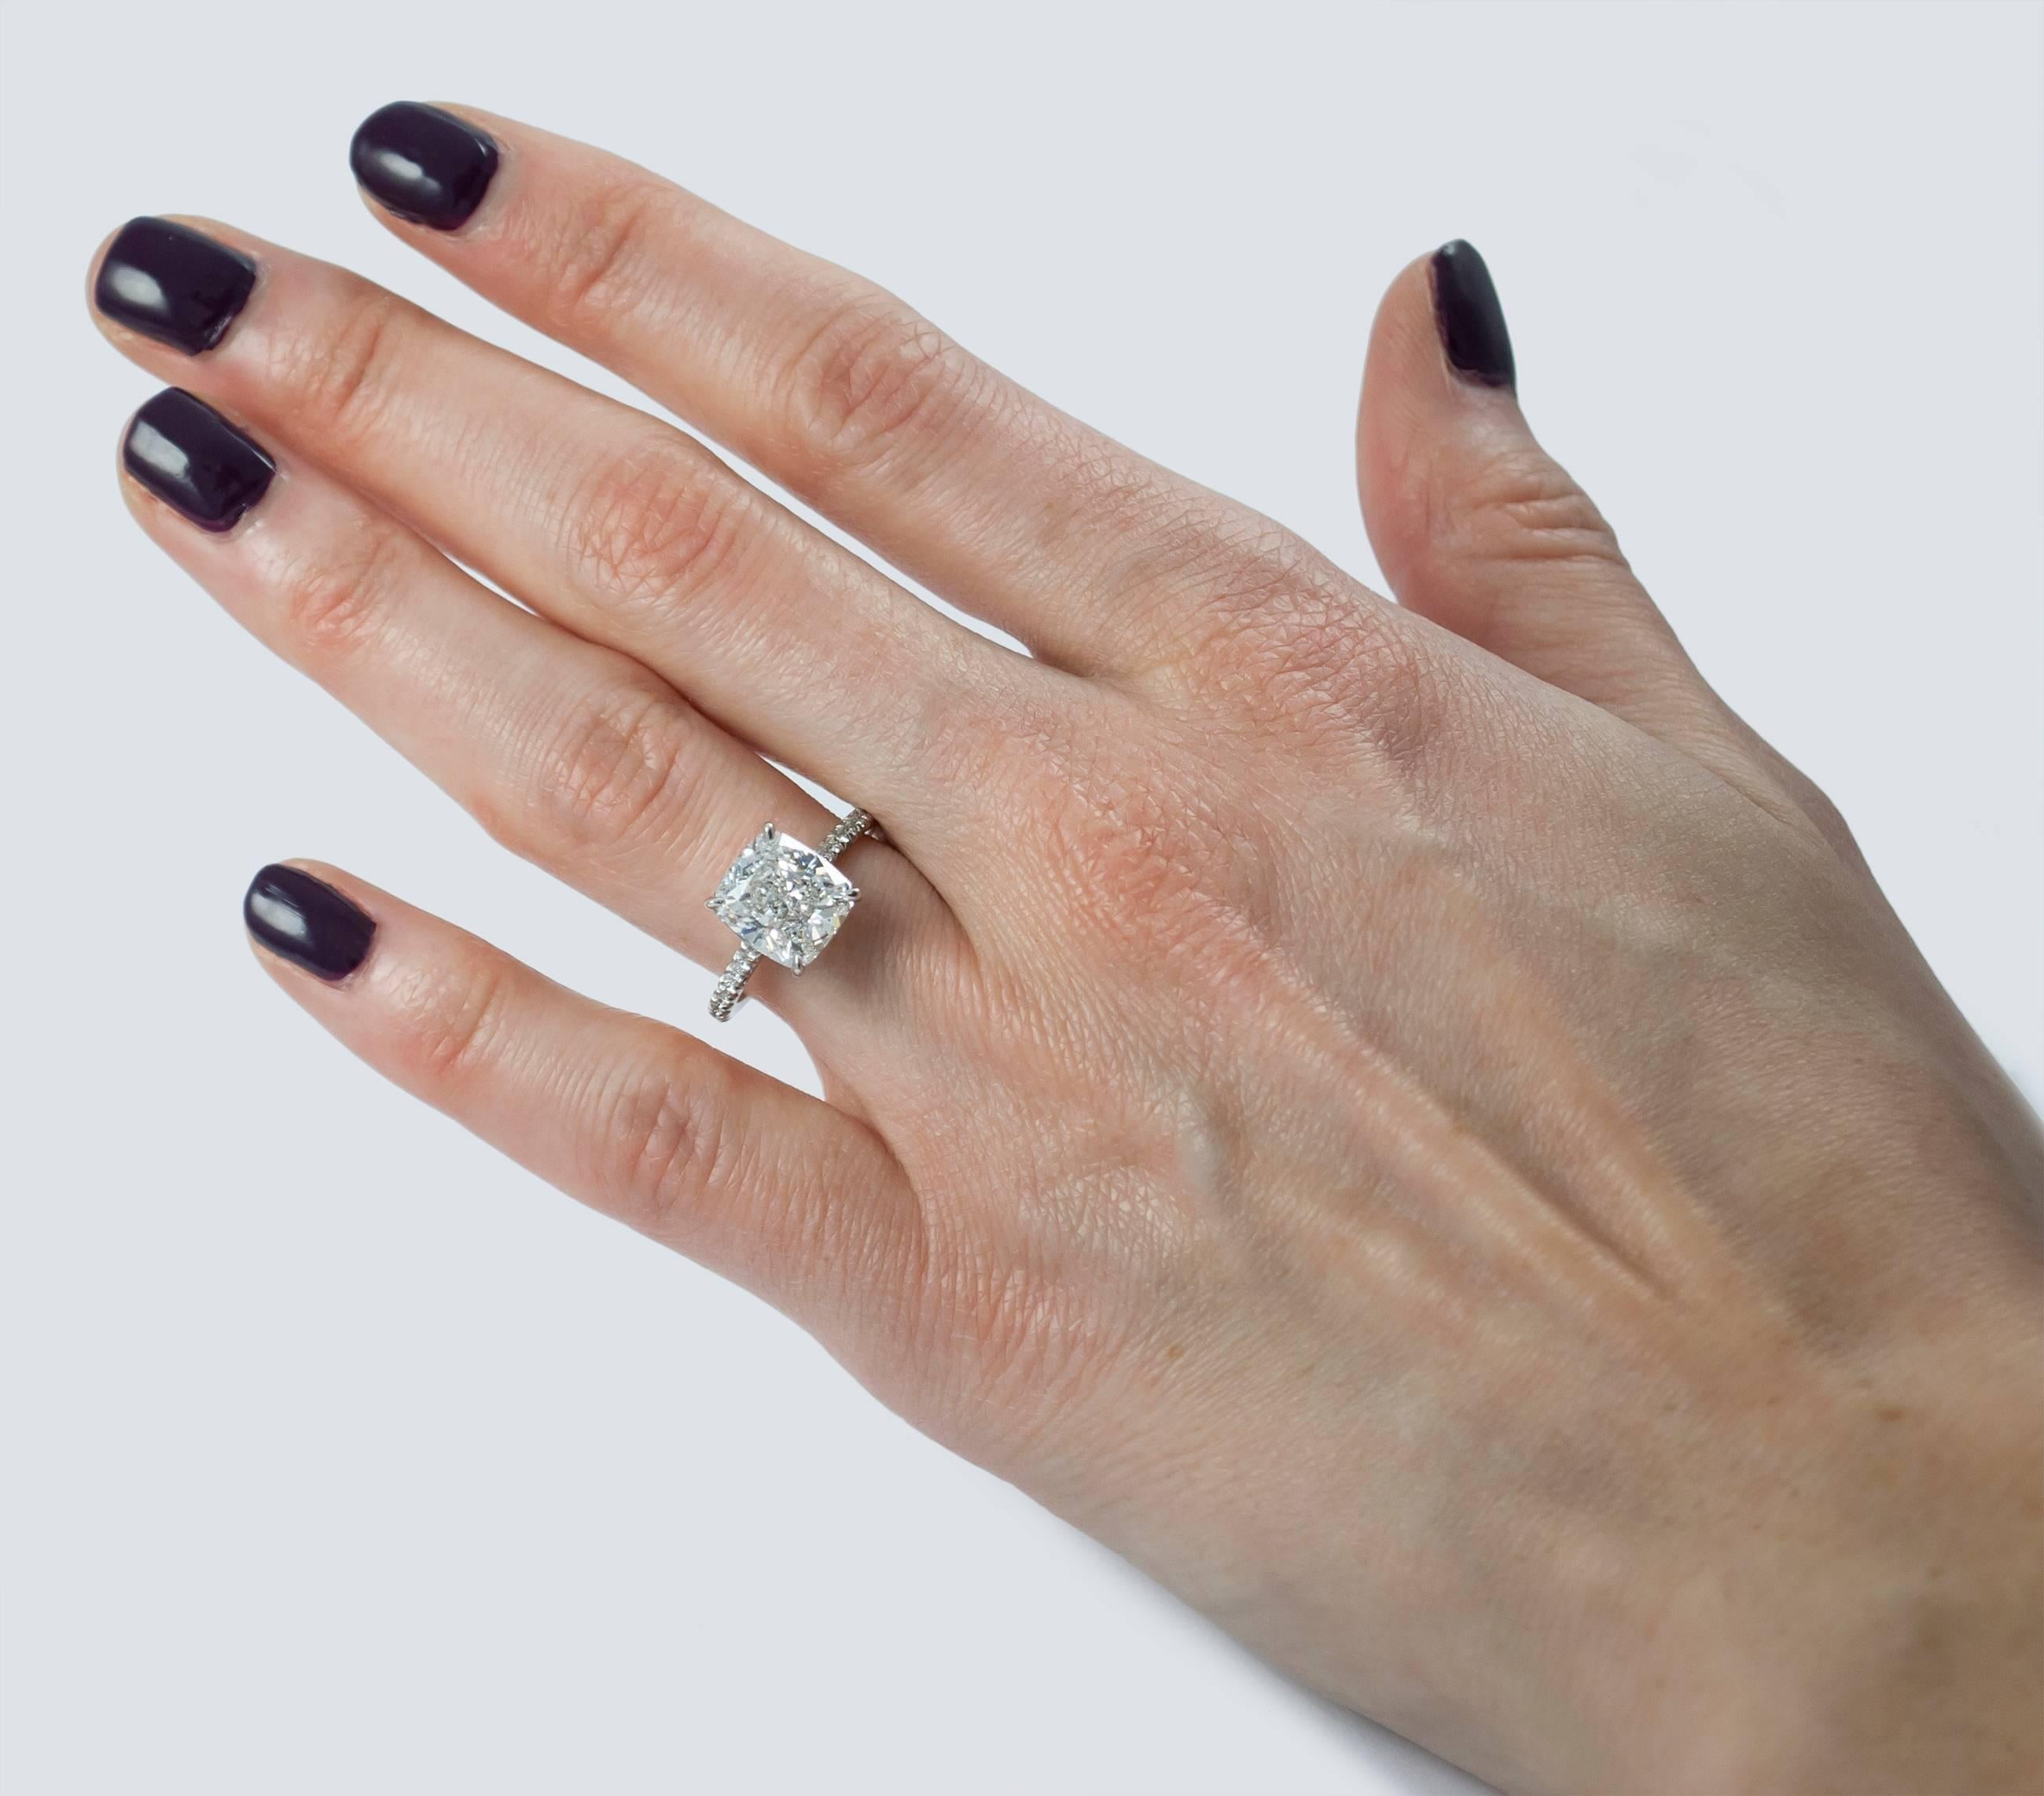 This solitaire from the J. Birnbach collection features a GIA certified 4.01 carat cushion modified brilliant, graded with D color and SI1 clarity. The diamond is set on a platinum mounting with pave diamonds 3/4 down the band for added elegance and